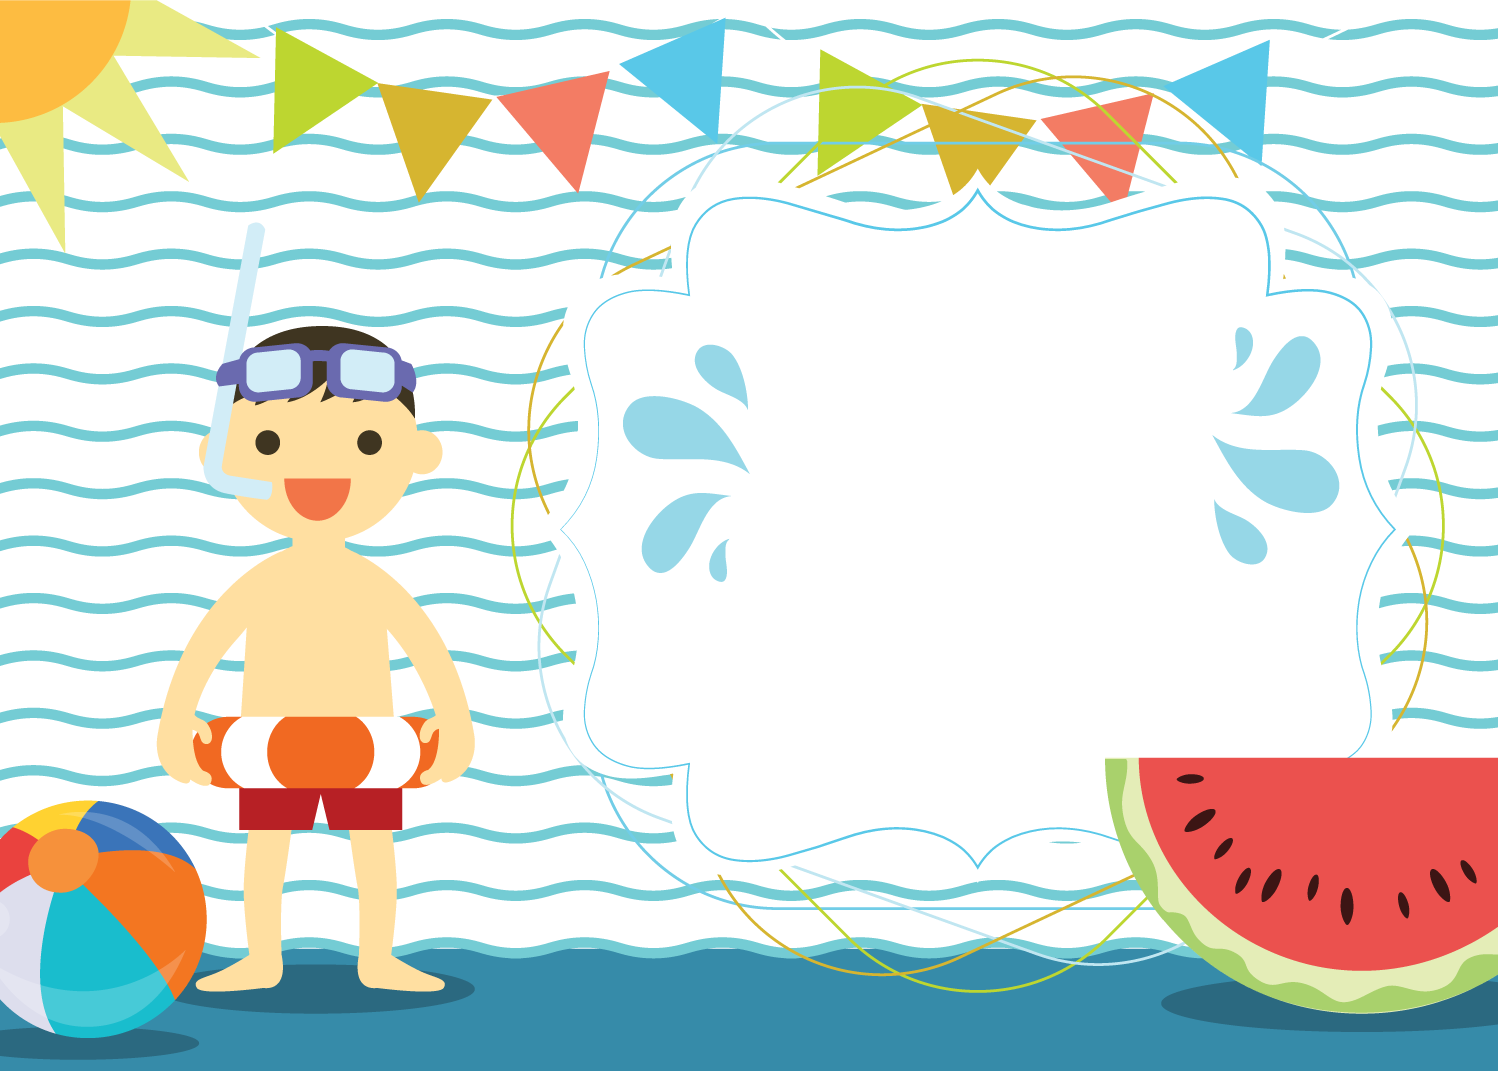 Summer clipart, Pool party png